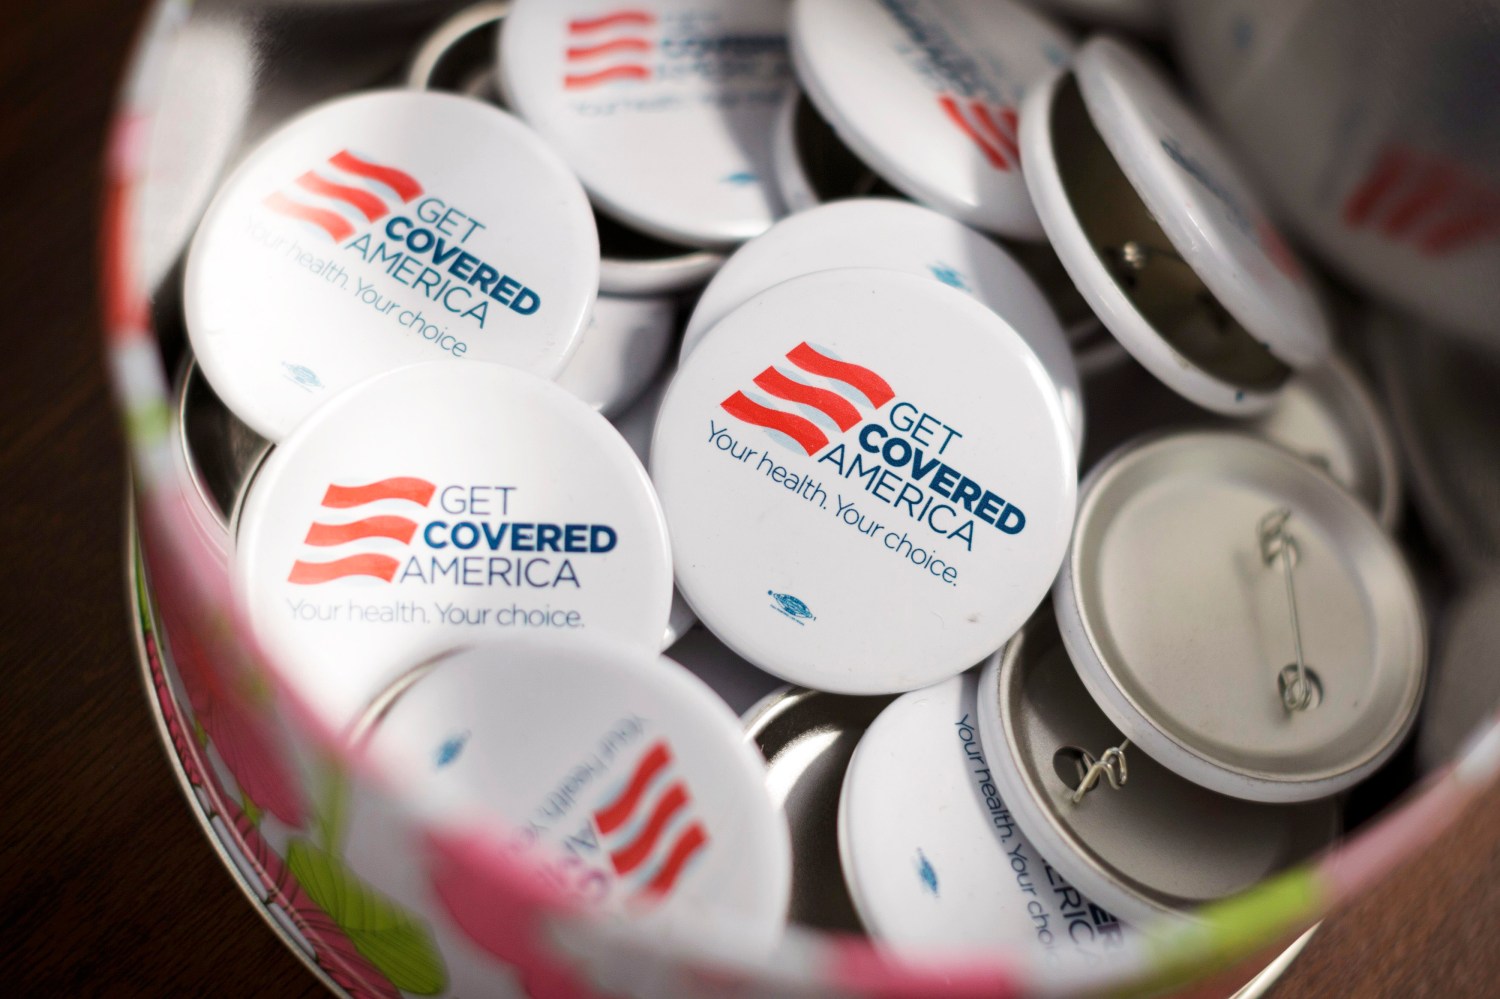 Get Covered America buttons are seen during a training session in Chicago, Illinois September 7, 2013 before volunteers canvas a Chicago neighborhood to talk with residents about the Affordable Care Act - also known as Obamacare. Picture taken September 7, 2013.   REUTERS/John Gress   (UNITED STATES - Tags: HEALTH POLITICS)